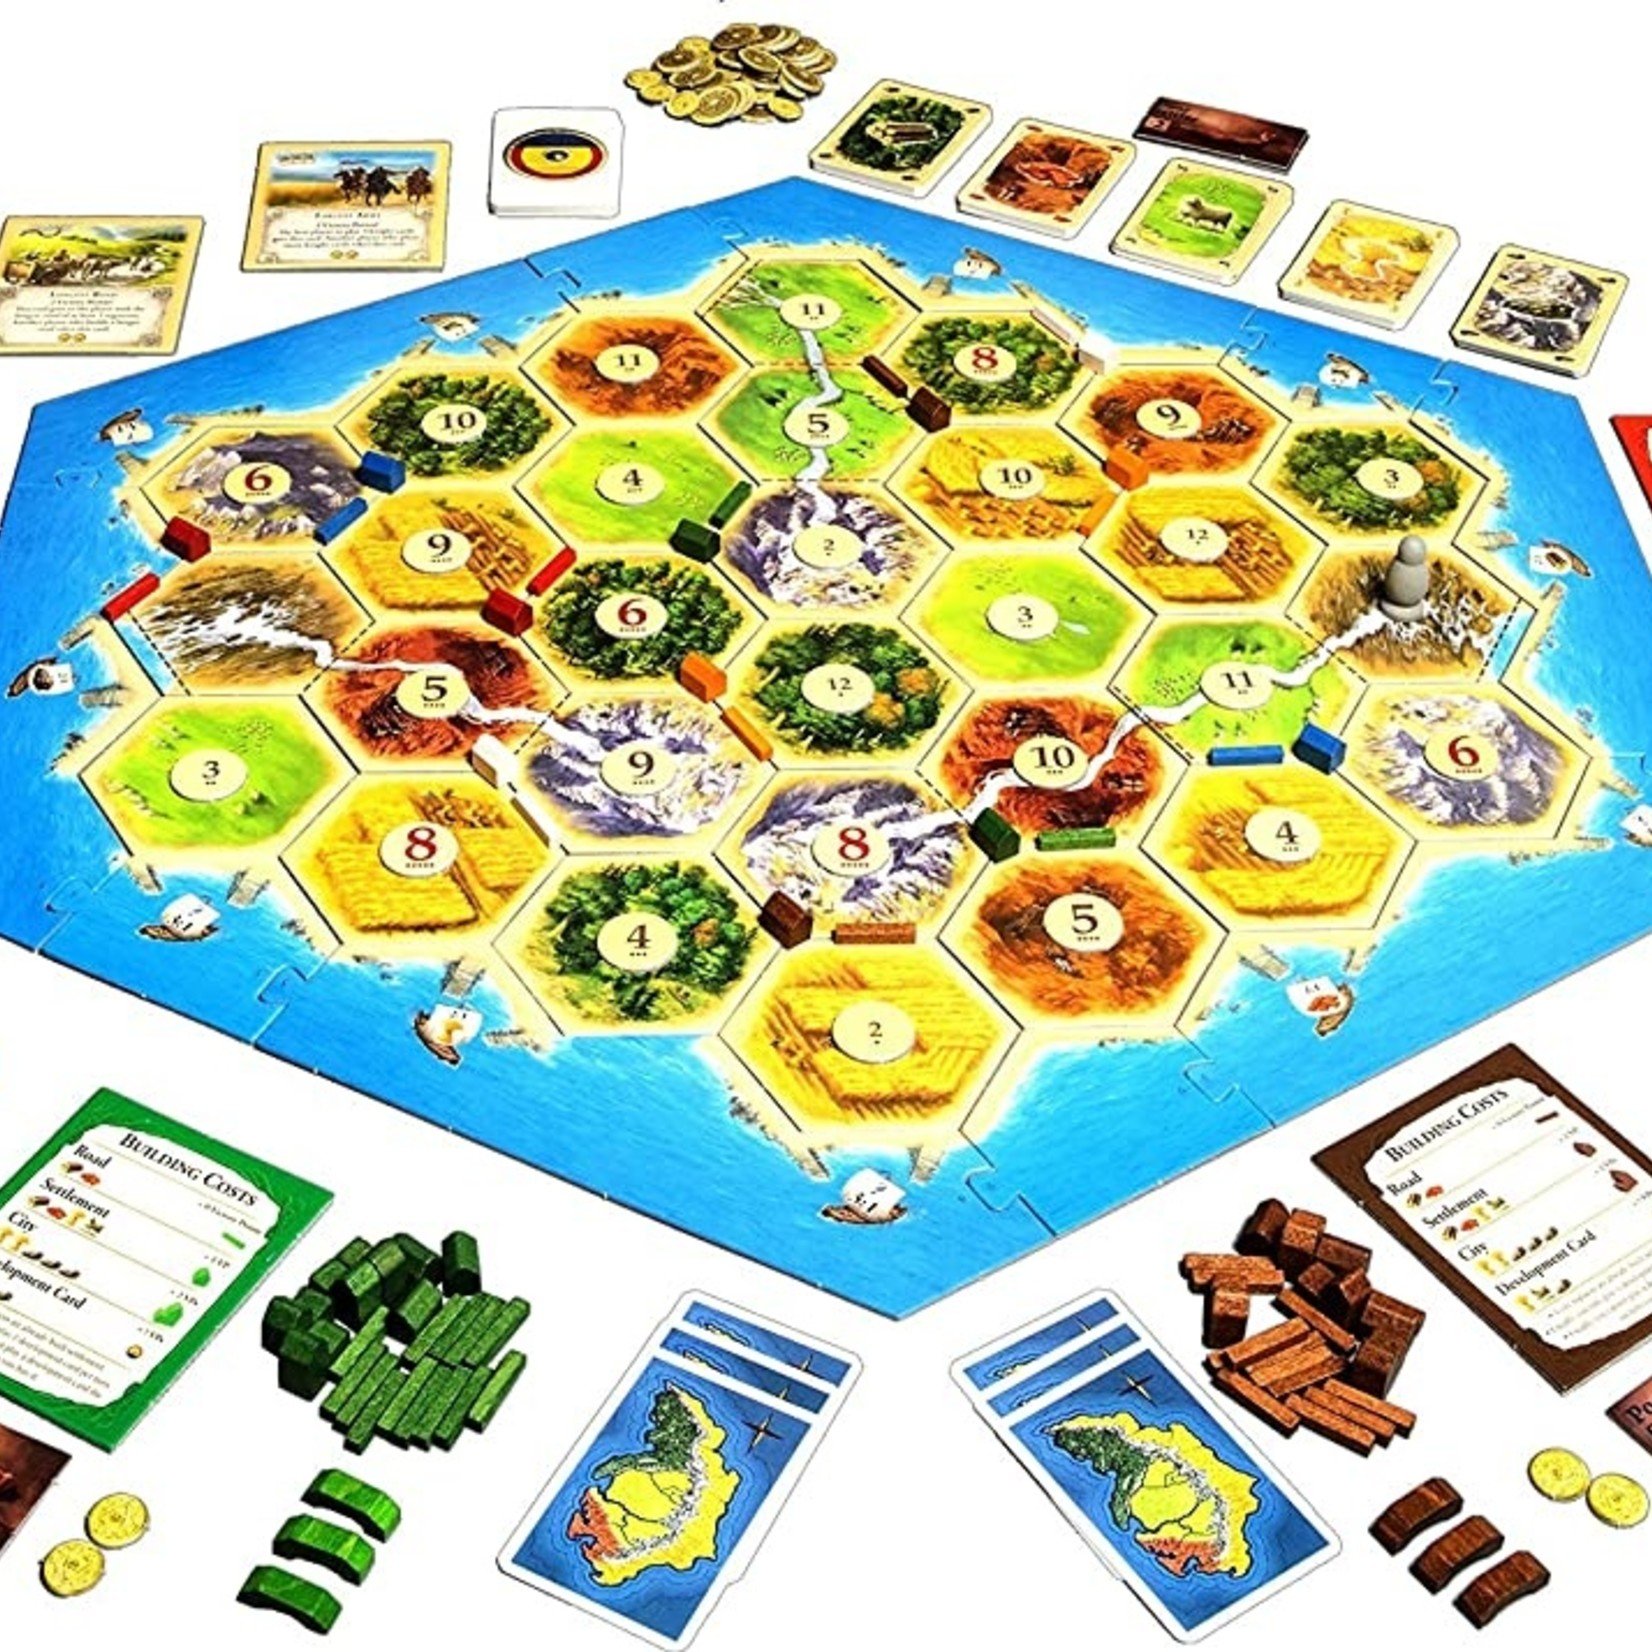 Catan Studio Catan Traders and Barbarians Expansion 5-6 Player Extension